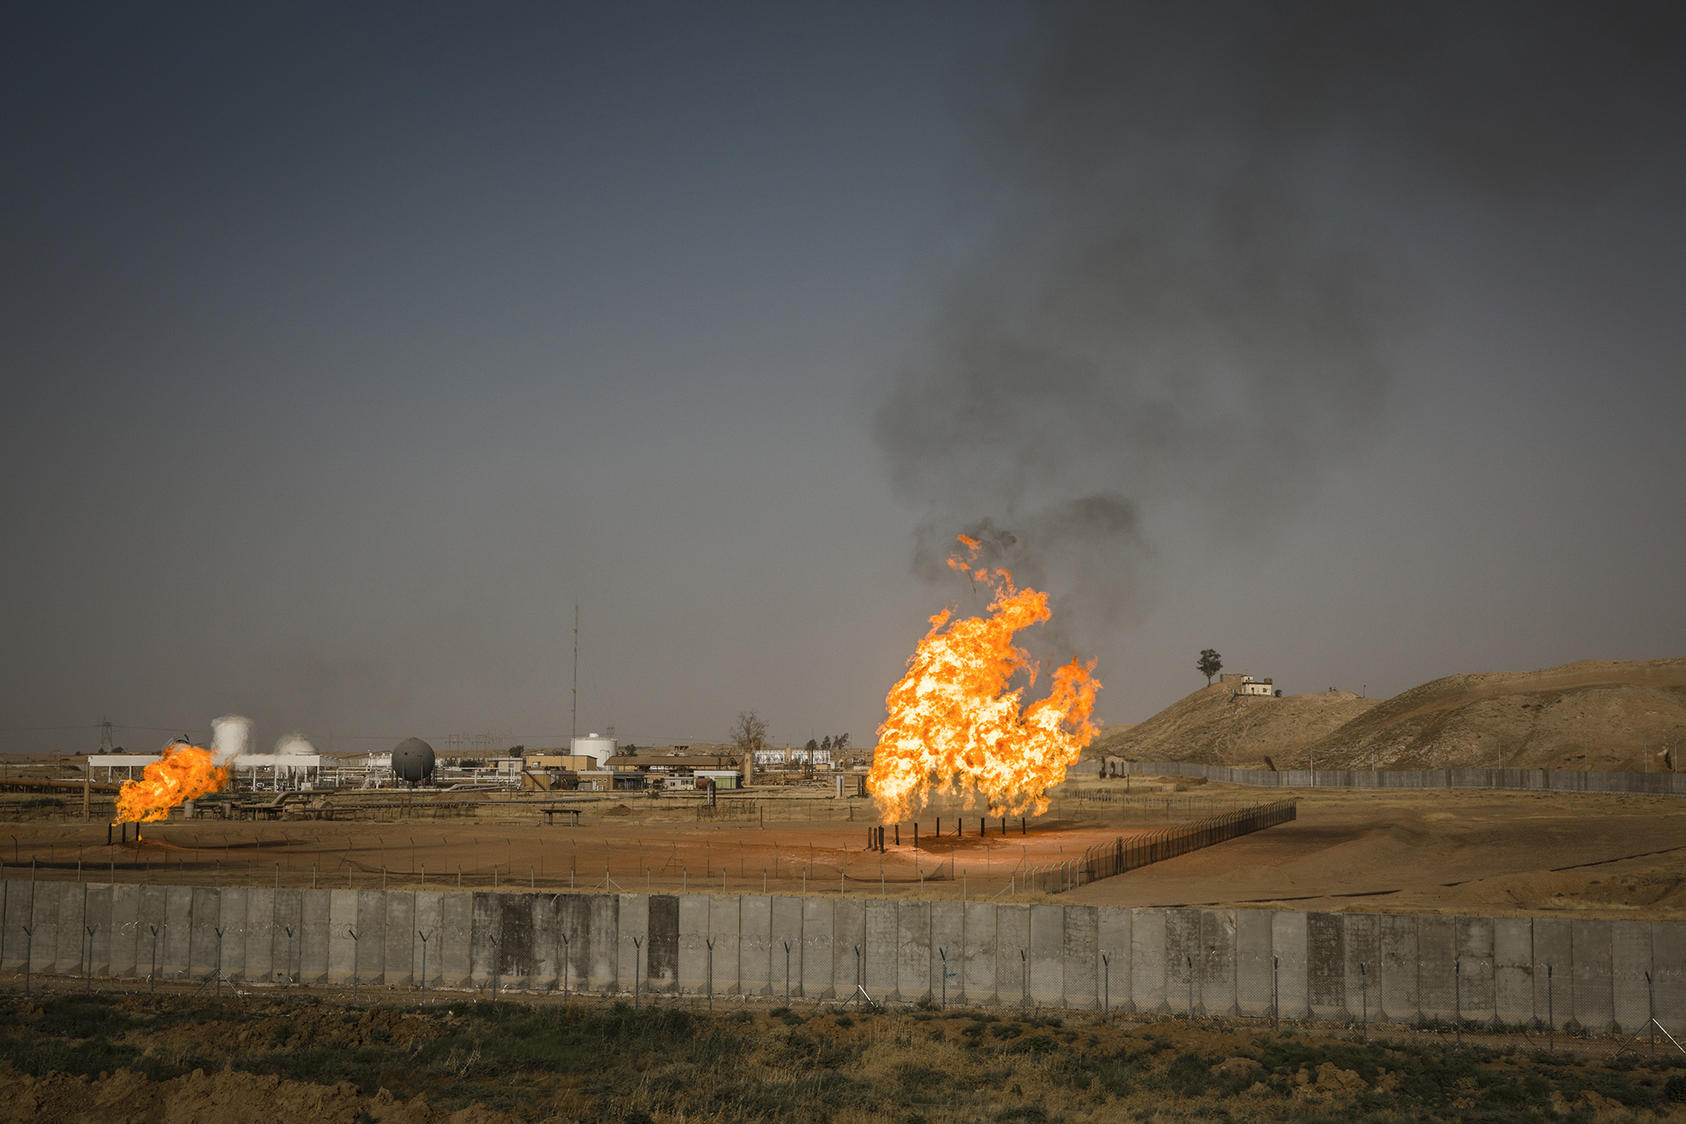 Gas flares at an oil field in Kurdish-controlled territory near Kirkuk, Iraq, Oct. 2, 2017. Kurds voted overwhelmingly for independence in a referendum in September that drew threats of retaliation from the Iraqi authorities, but since then, the Kurds have taken no steps to actually declare independence, and Baghdad and its allies have done nothing to make good on their threats of intervention. (Ivor Prickett/The New York Times) 